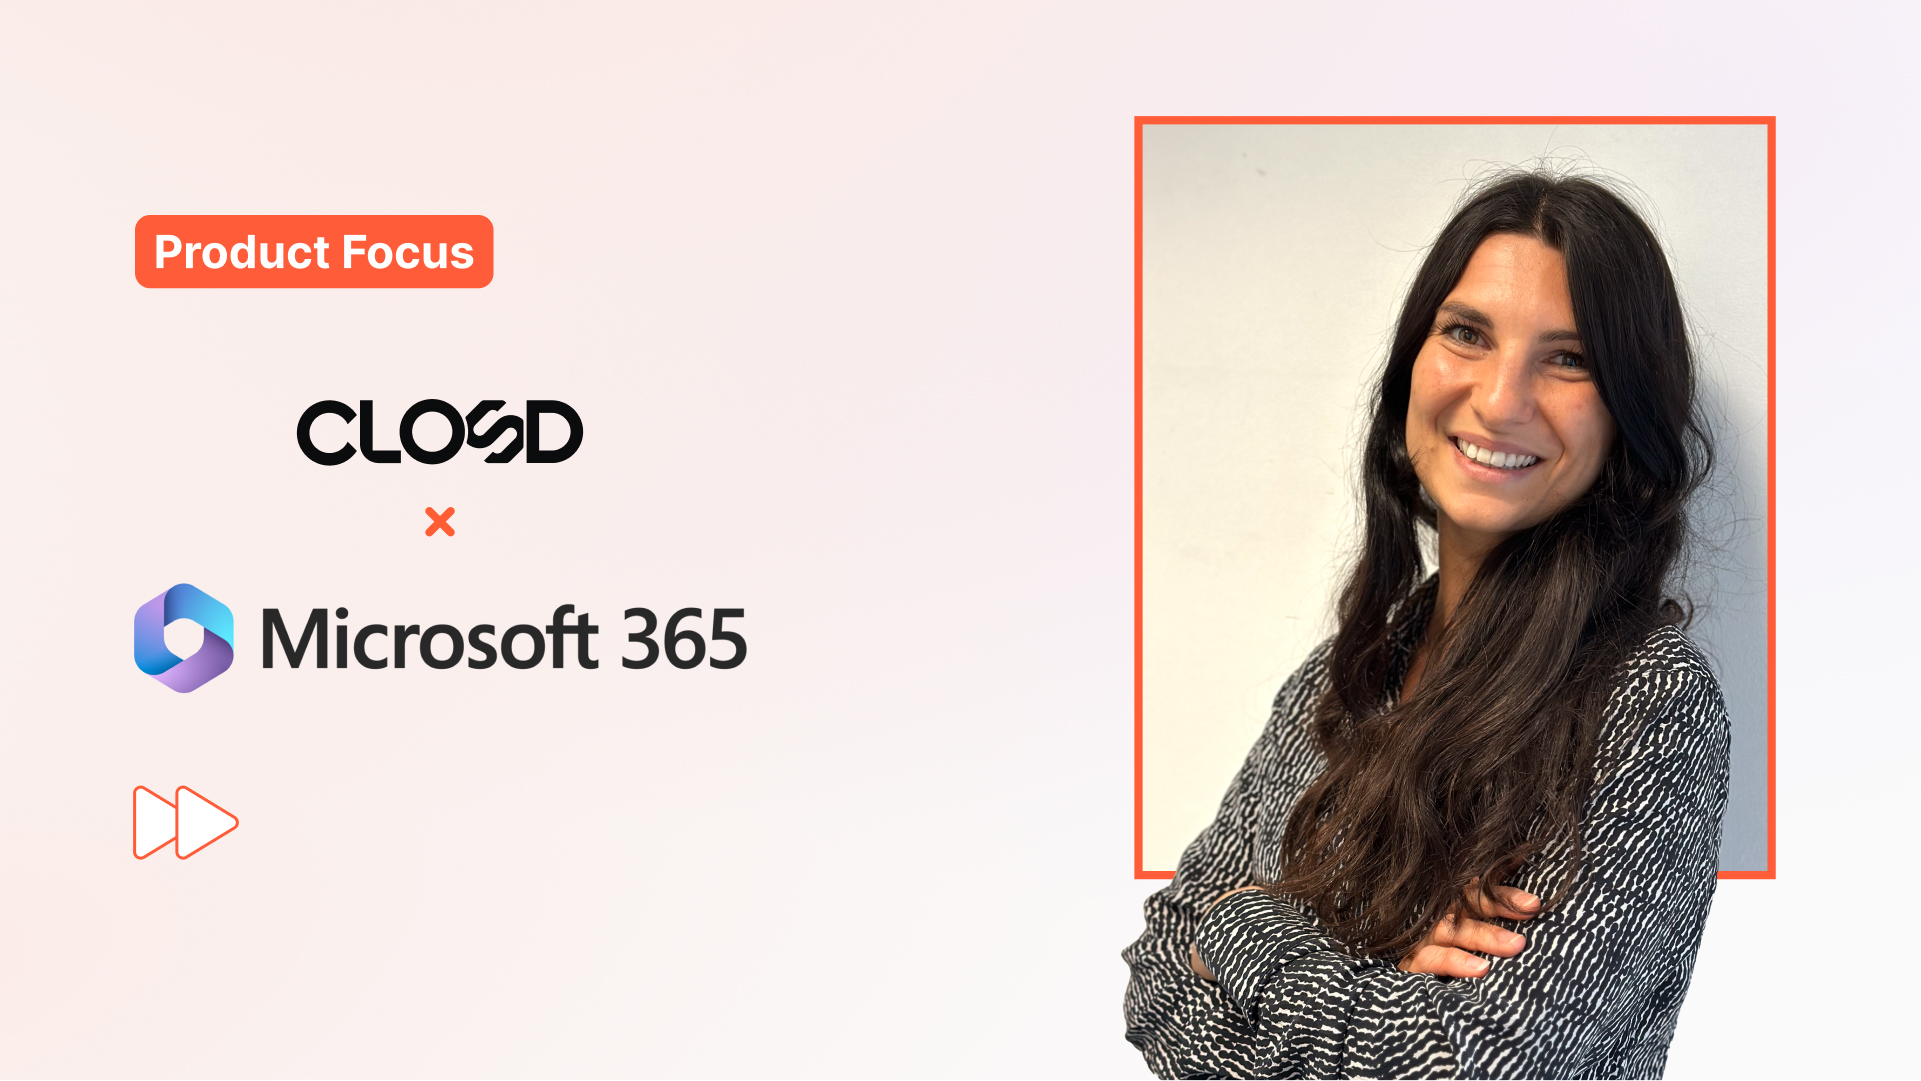 Product Focus with Marie-Céline and the Microsoft 365 integration on Closd.